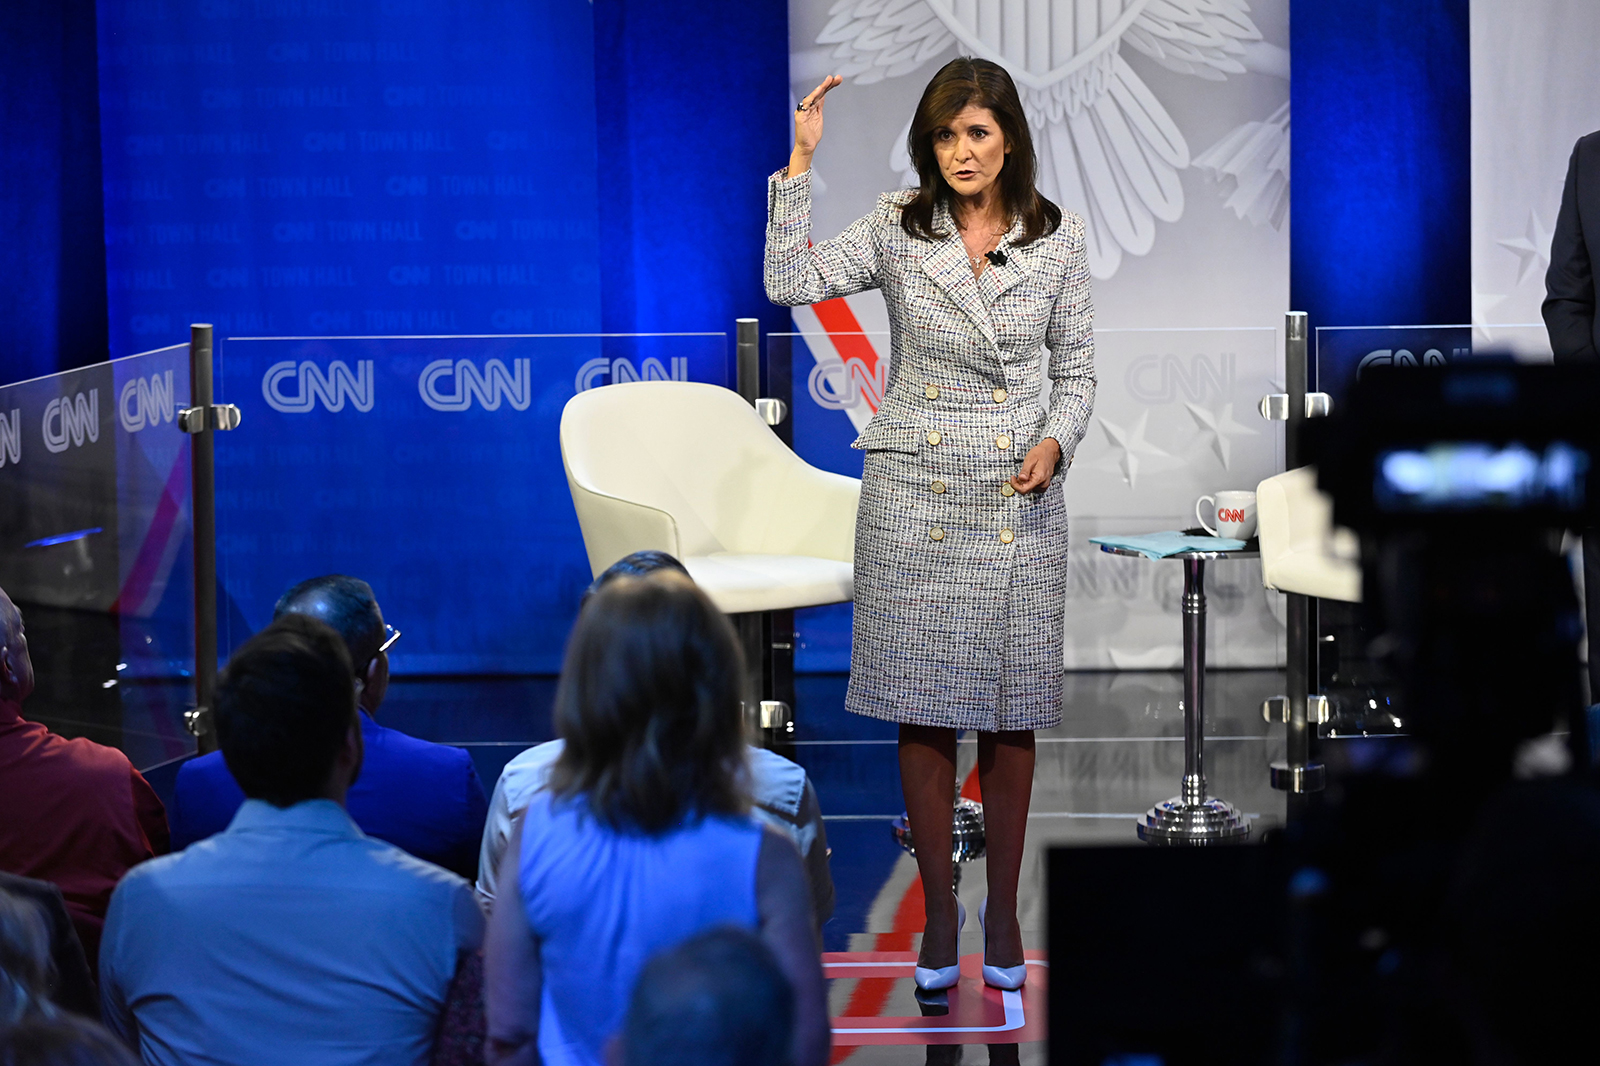 Nikki Haley gestures as she speaks during the town hall.